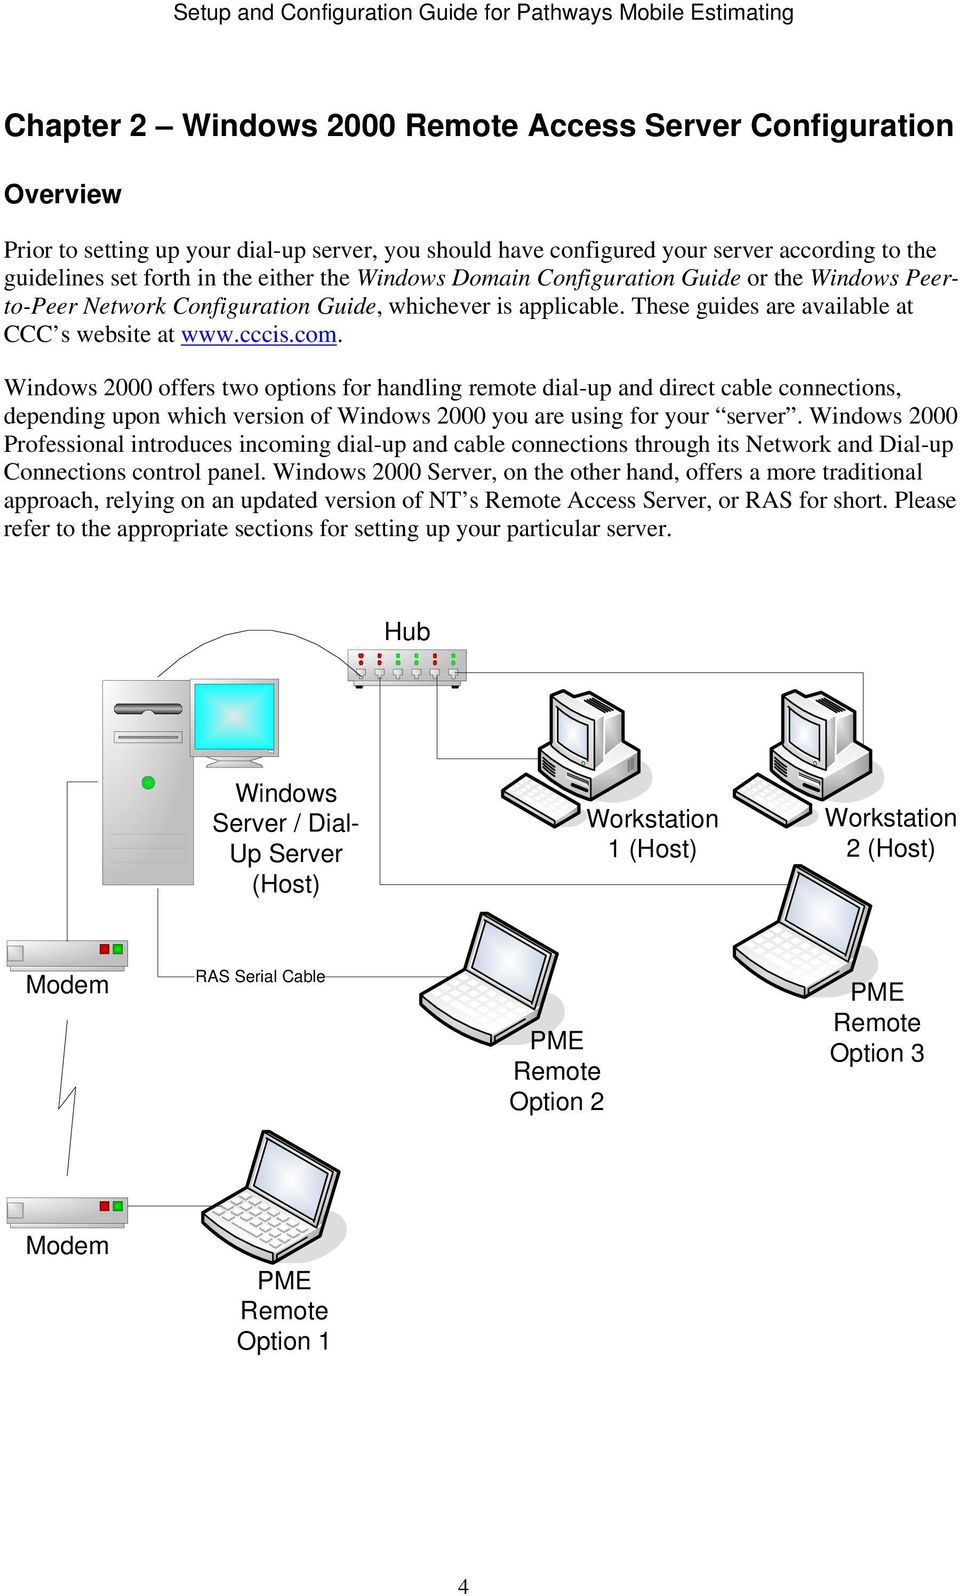 Windows 2000 offers two options for handling remote dial-up and direct cable connections, depending upon which version of Windows 2000 you are using for your server.